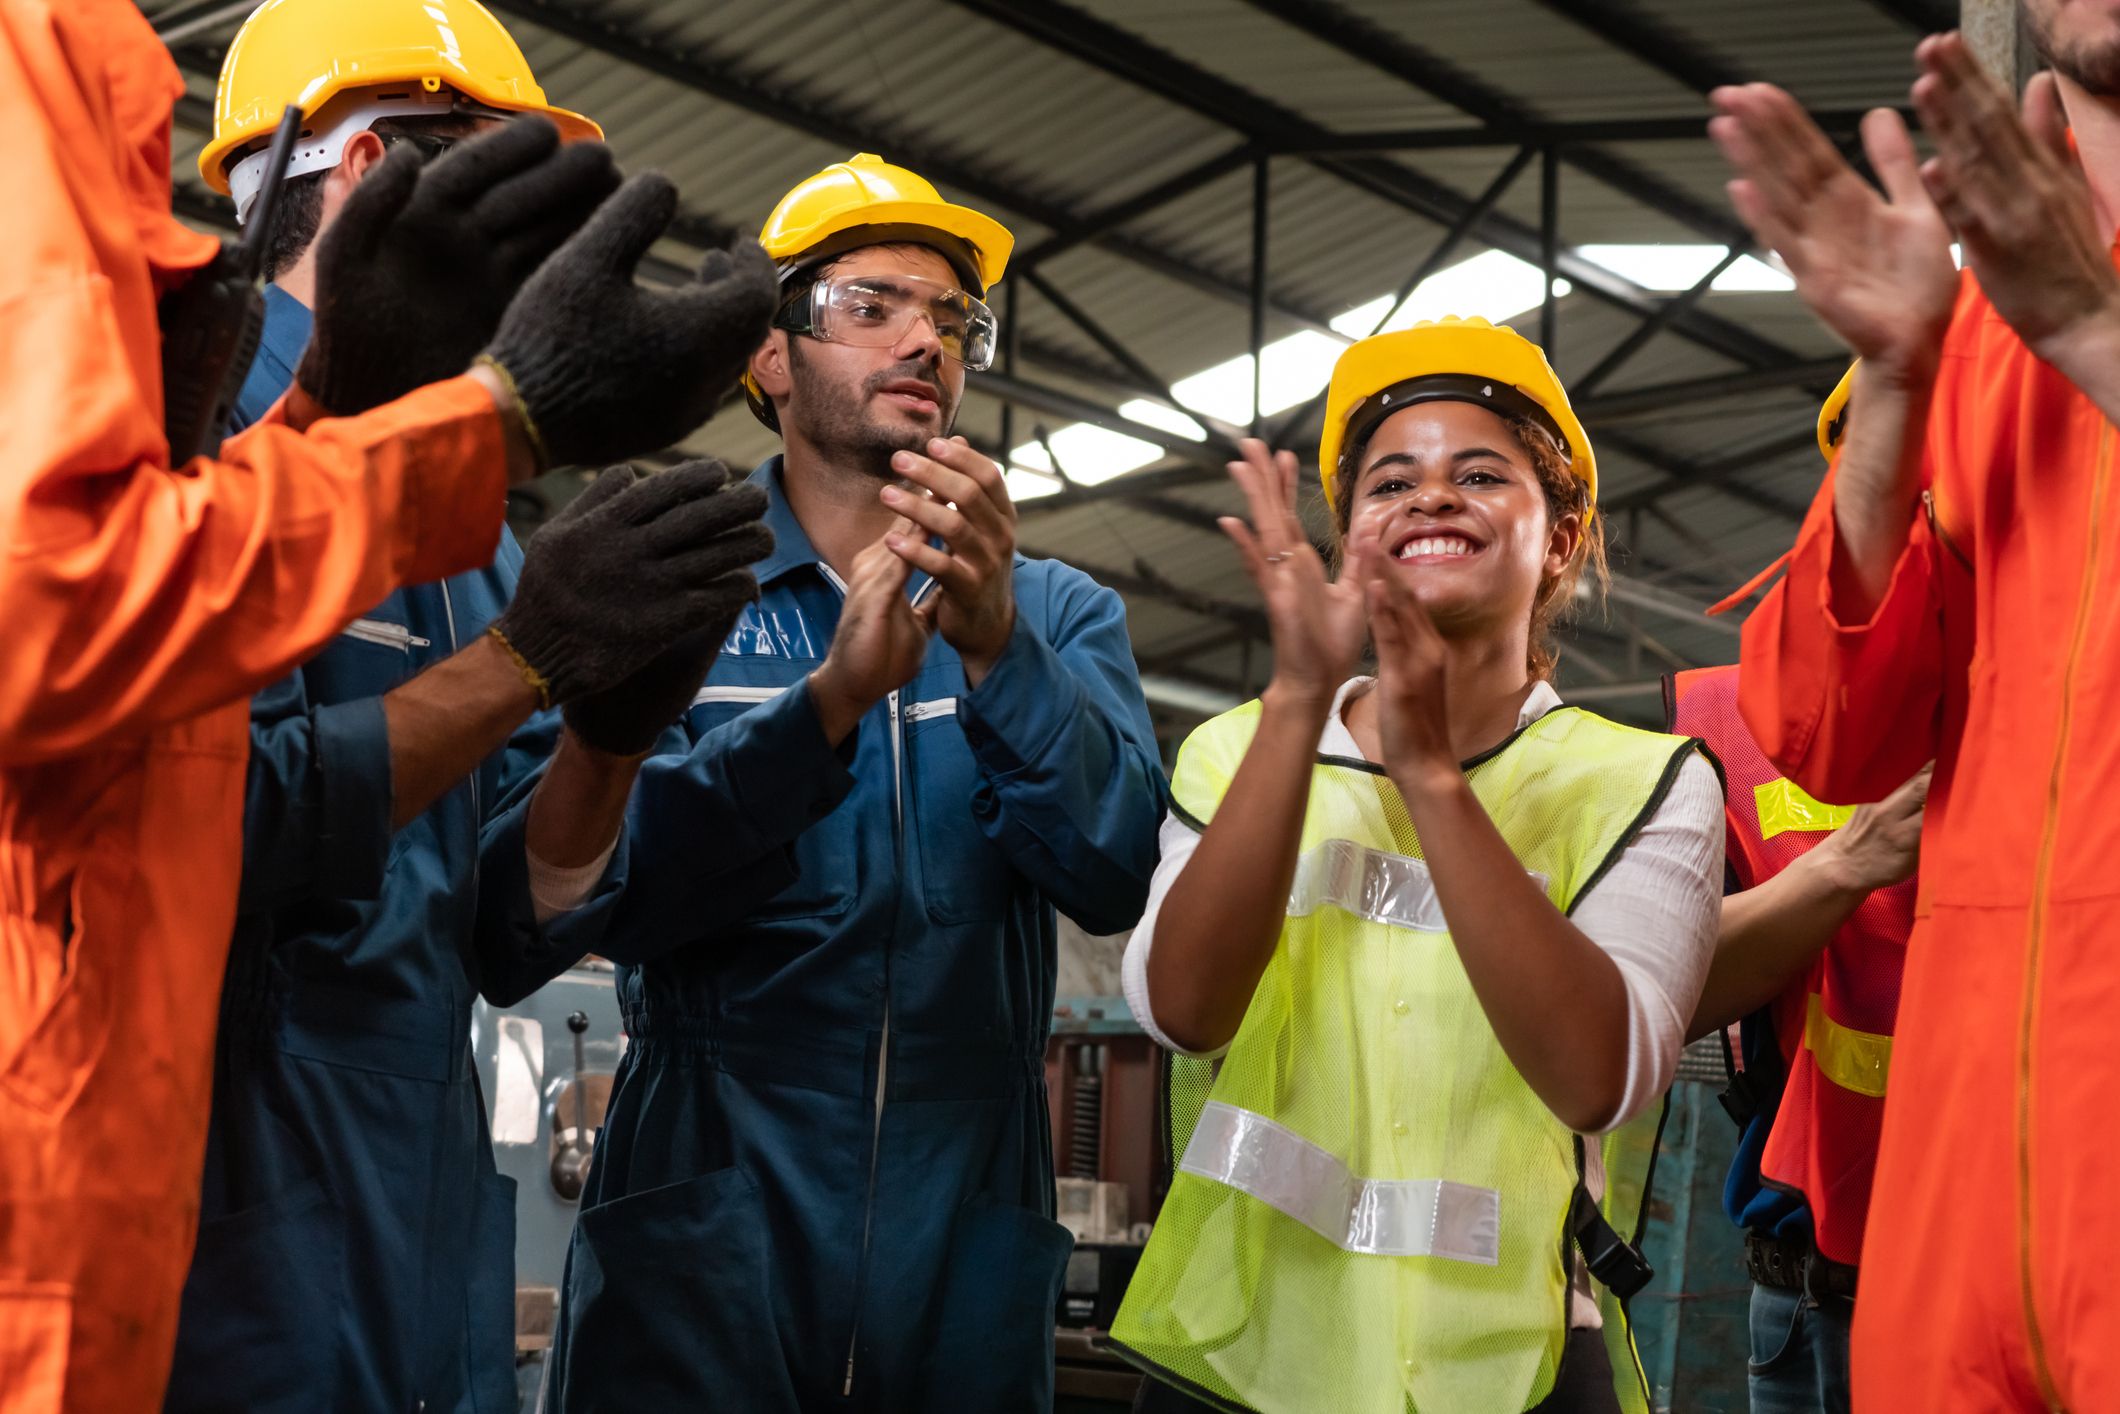 Workers celebrate a success in their factory.